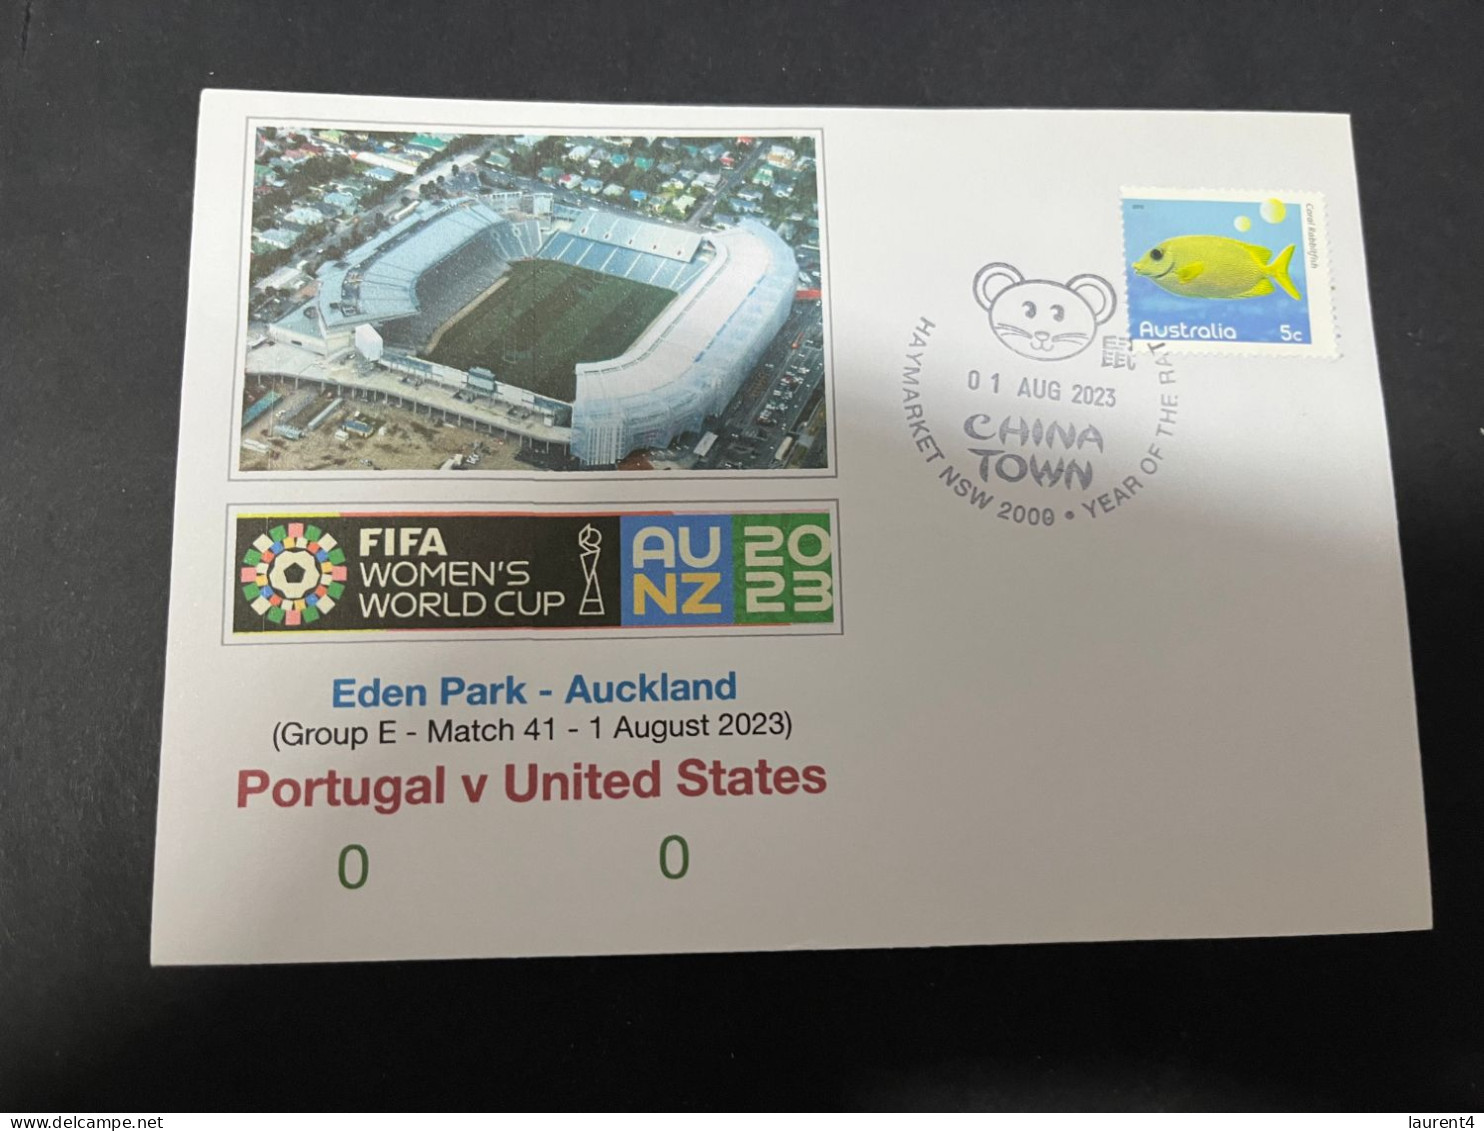 22-2-2024 (1 W 2 A) 4 covers - FIFA Women's Football World Cup 2023 - Portugal matches